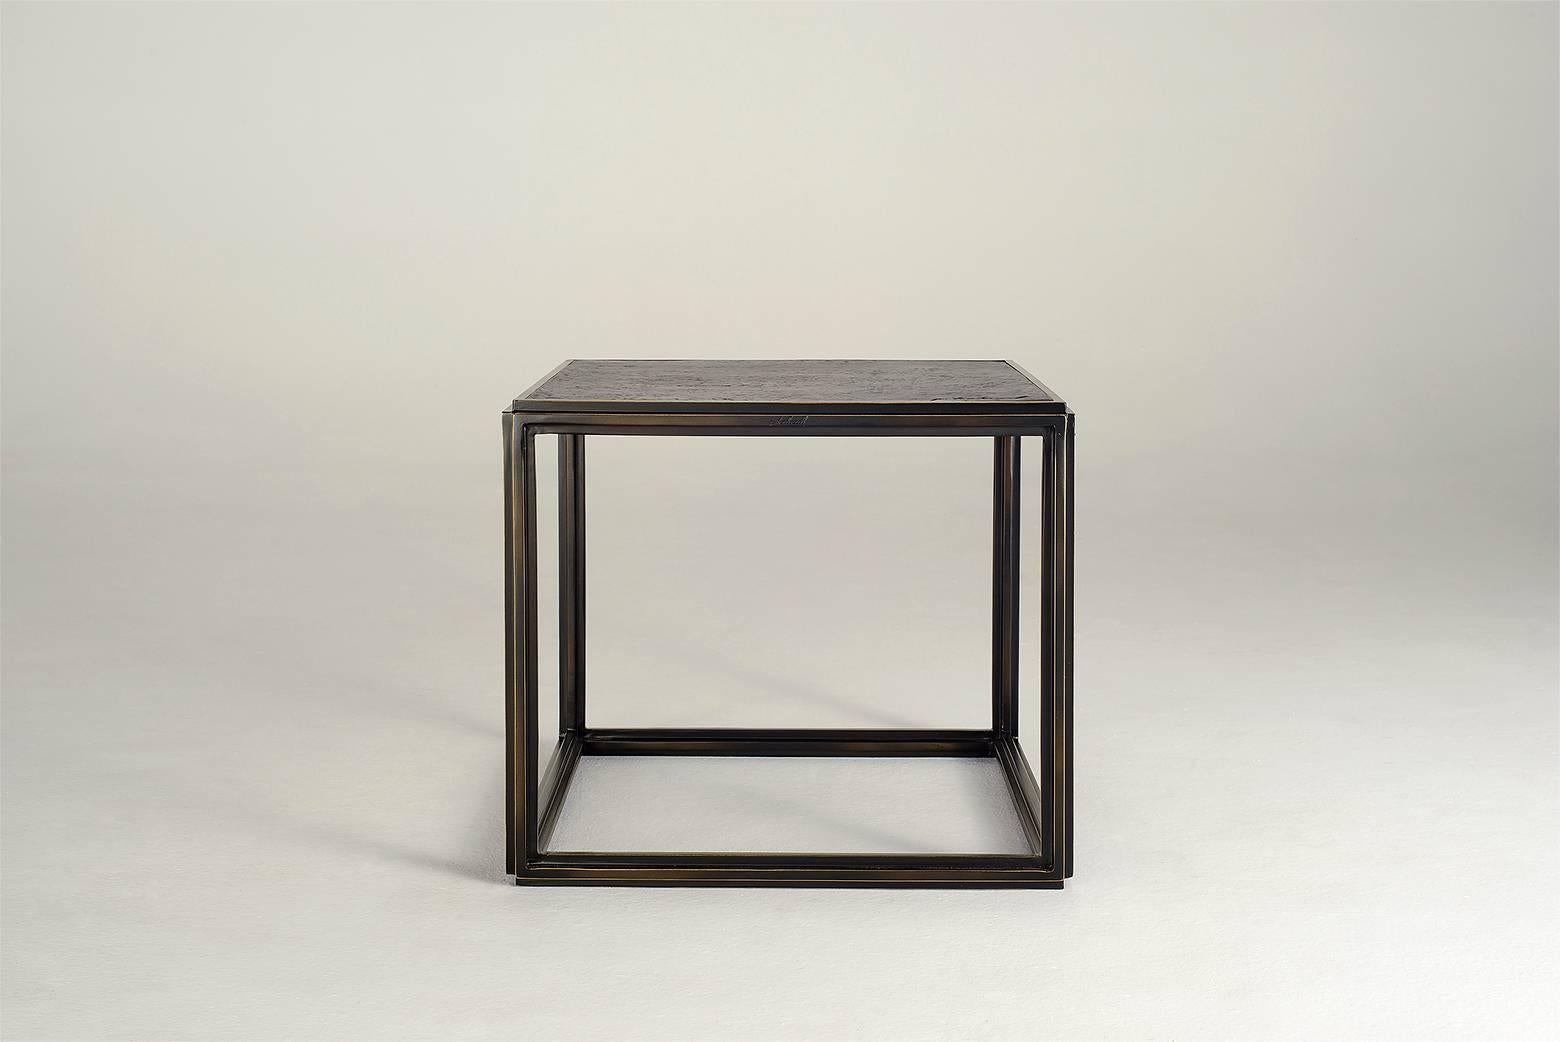 Model: PT8 
Top: Bronze in sculpture black
Top finish: Bronze in sculpture black
Bottom: Available in glass at additional charge
Frame material: Extruded and hand-welded solid brass rods 
Frame finish: Black
Dimensions: 41.7 x 41.7 
(Low - 34.5) or